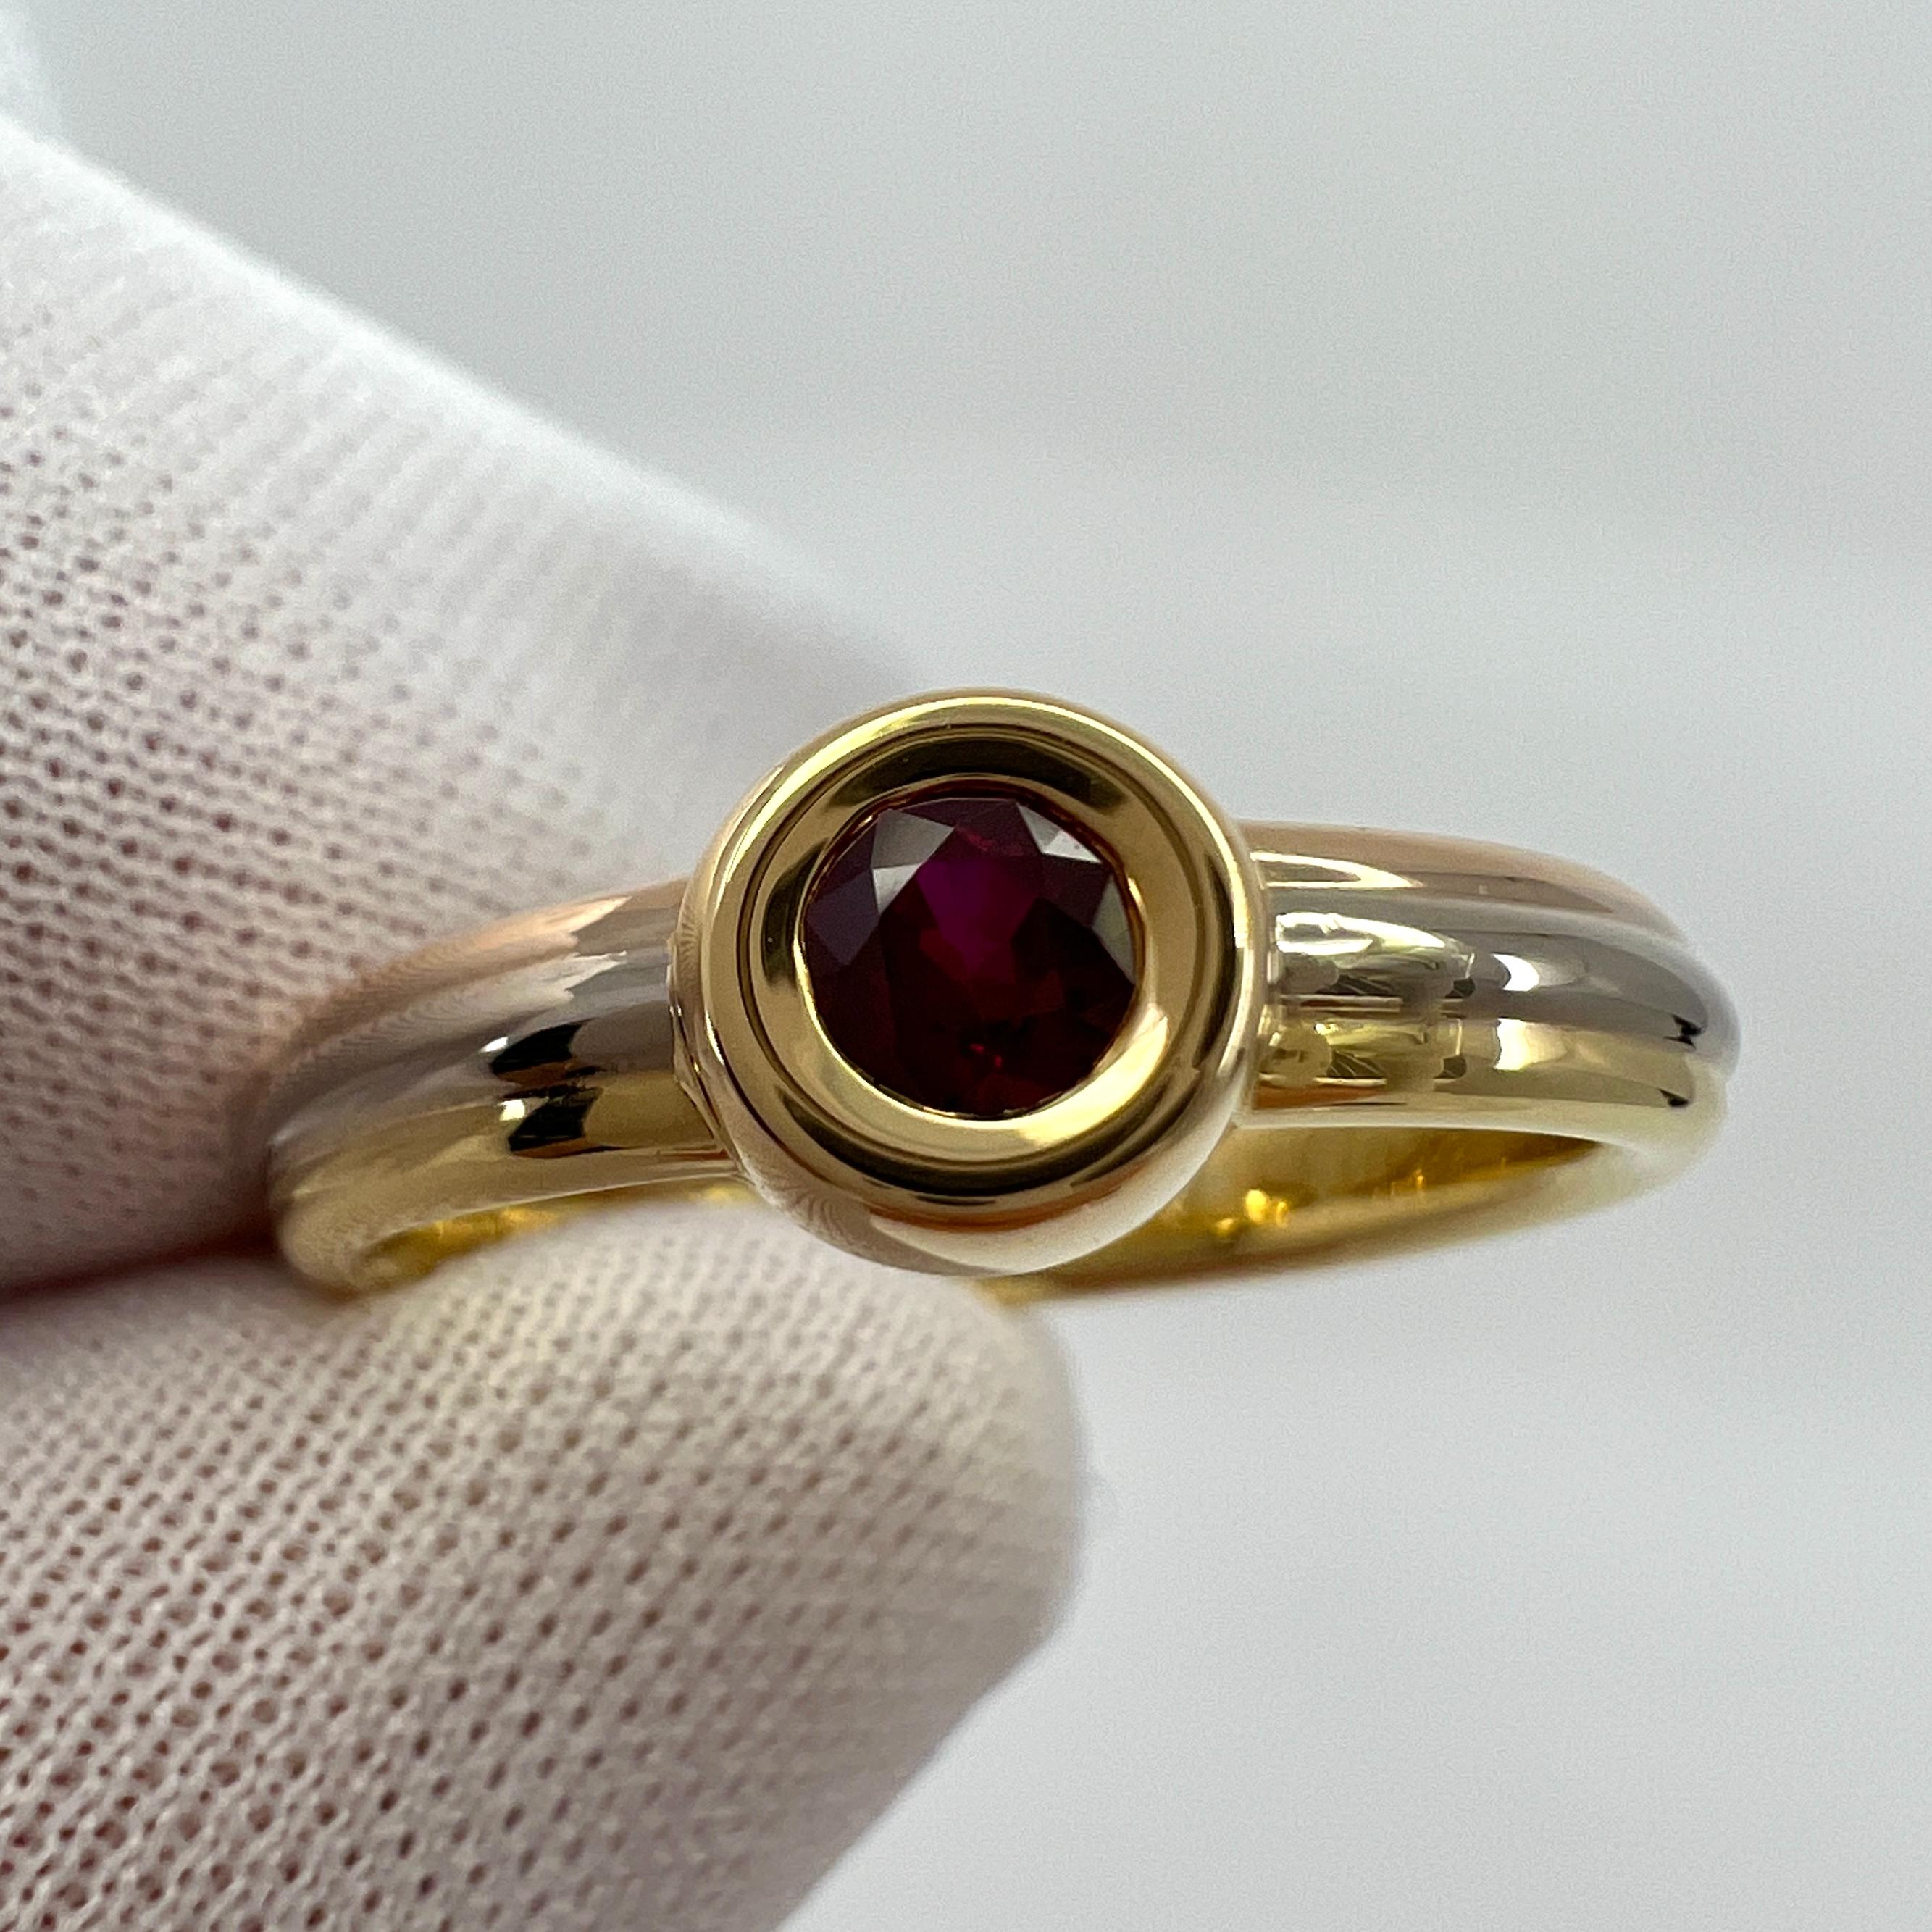 Vintage Cartier Round Cut Ruby 18k Tri Colour/Multi Tone Gold Solitaire Ring.

Stunning multi tone gold ring set with a fine vivid red ruby. Fine jewellery houses like Cartier only use the finest of gemstones and this ruby is no exception. A top